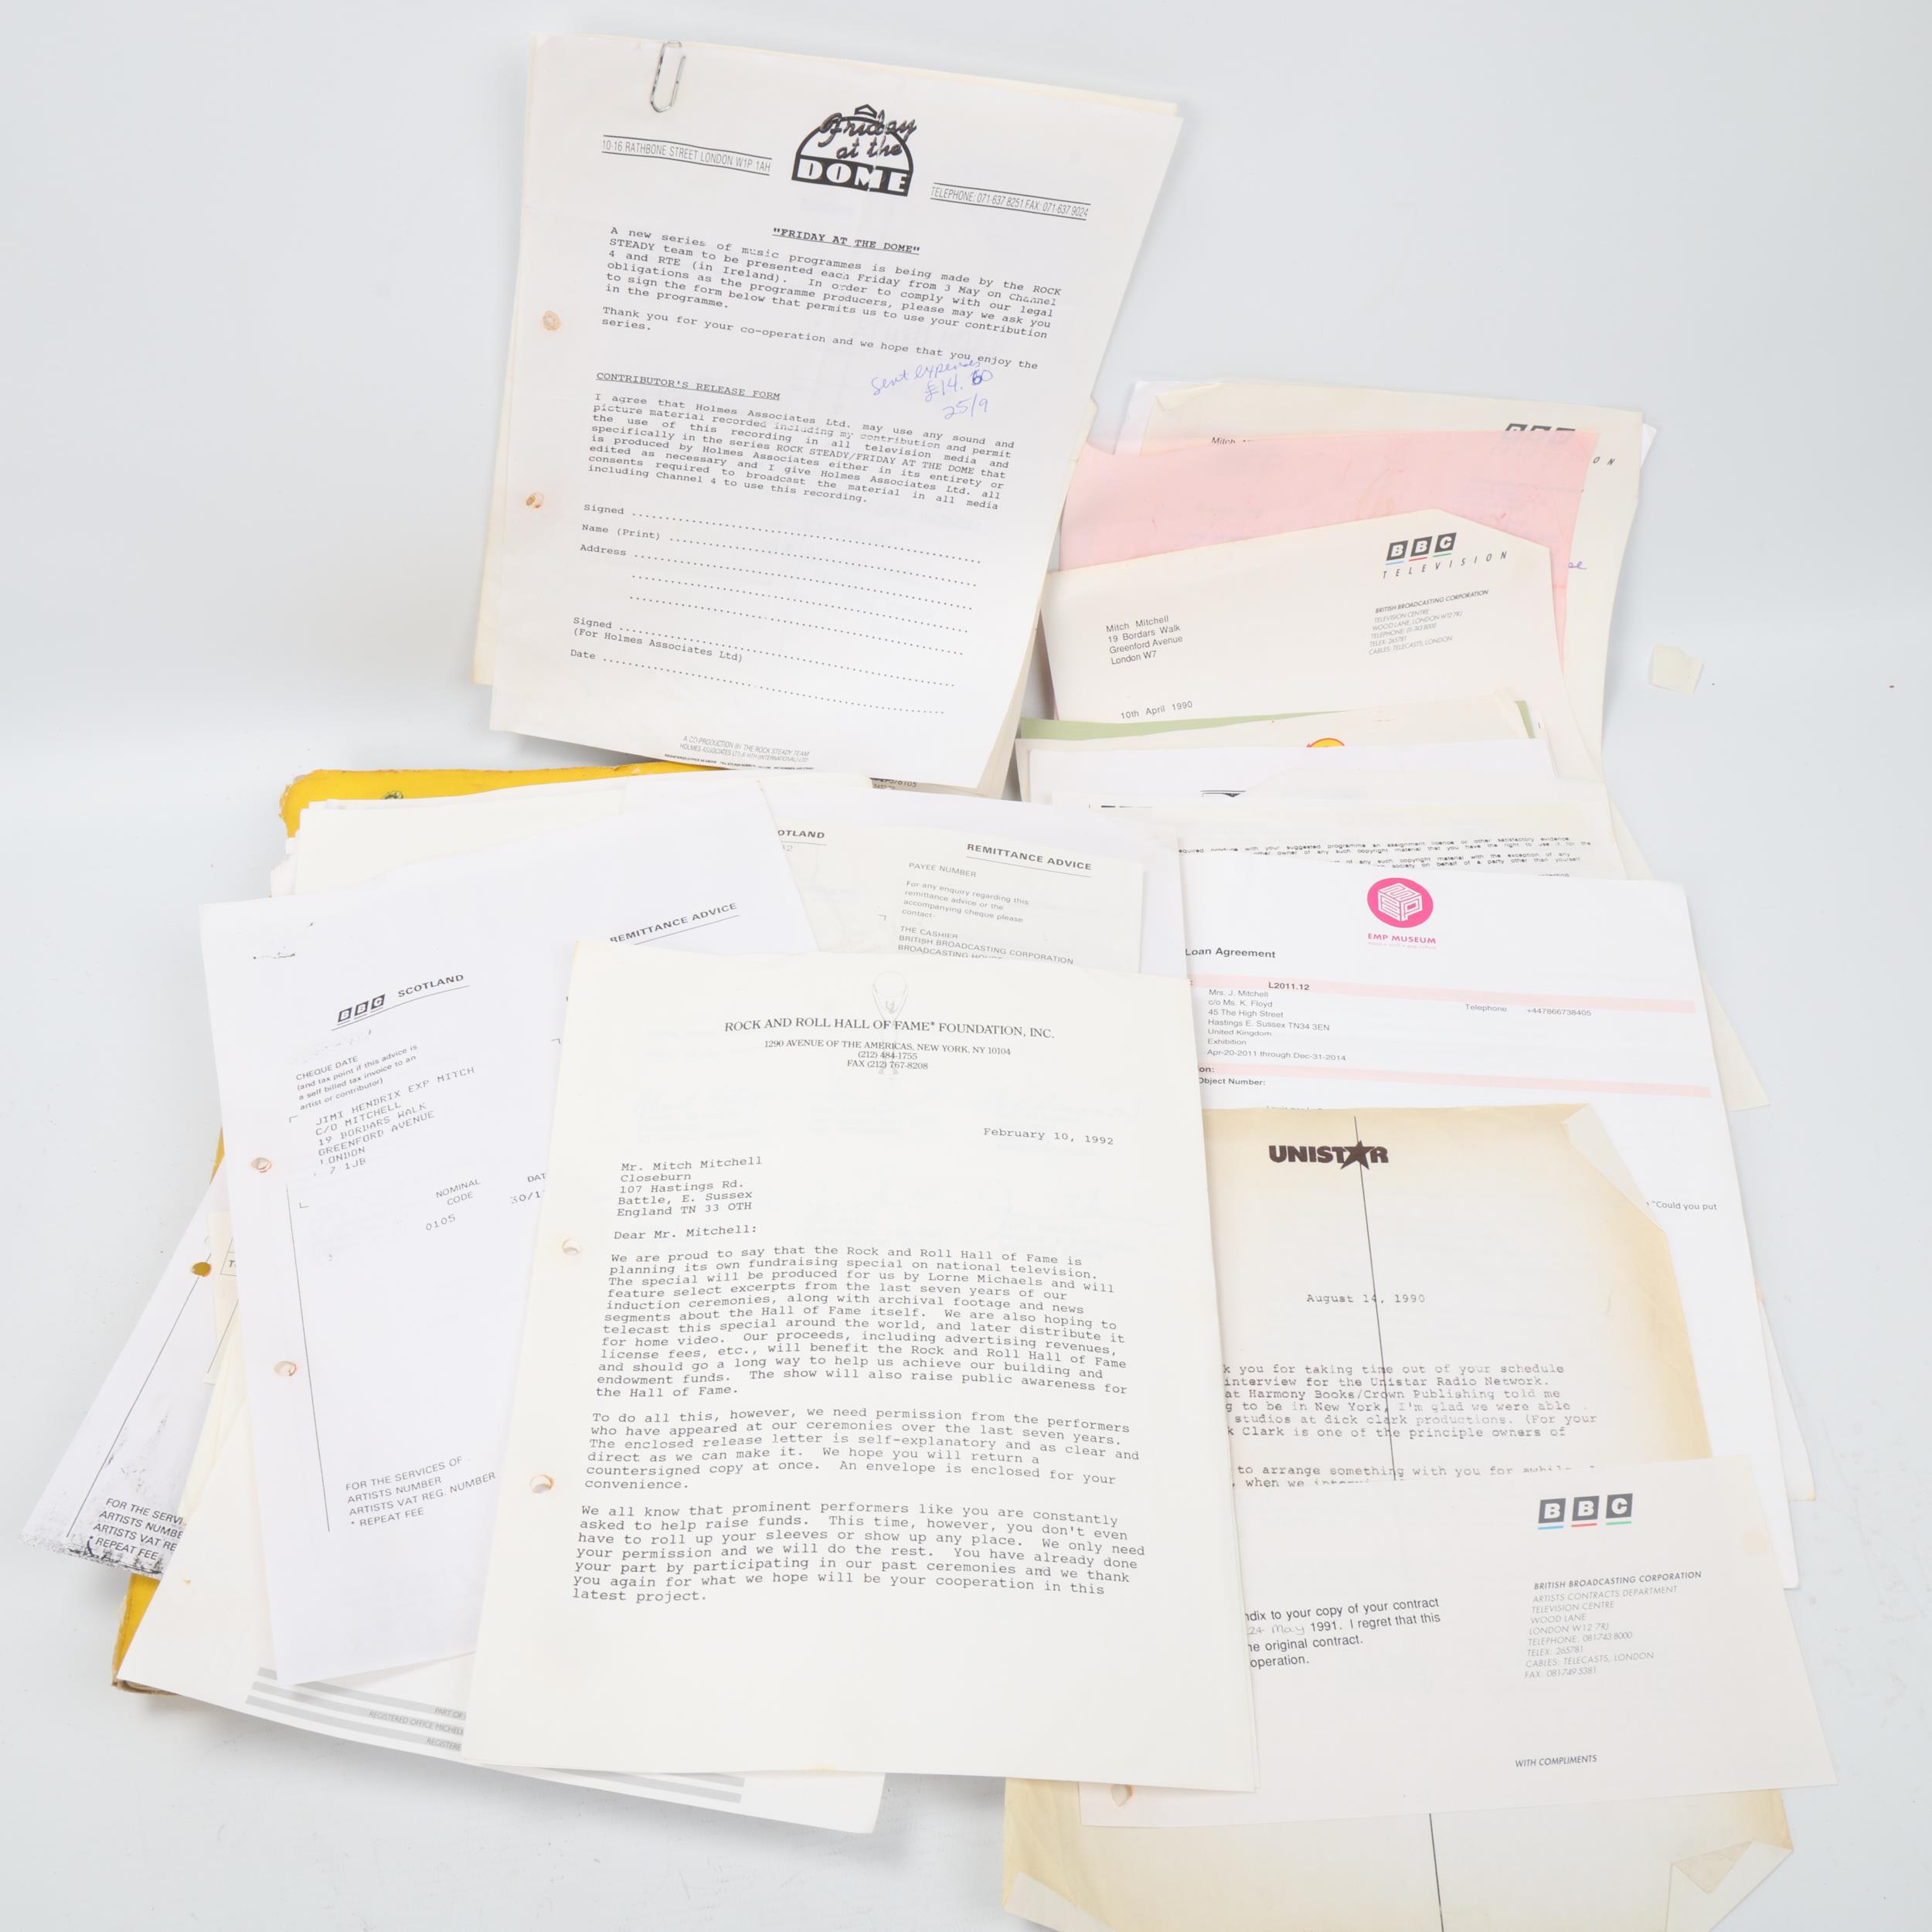 MITCH MITCHELL / JIMI HENDRIX. A Quantity of CONTRACTS, SCHEDULES, LETTERS Etc - Image 2 of 3